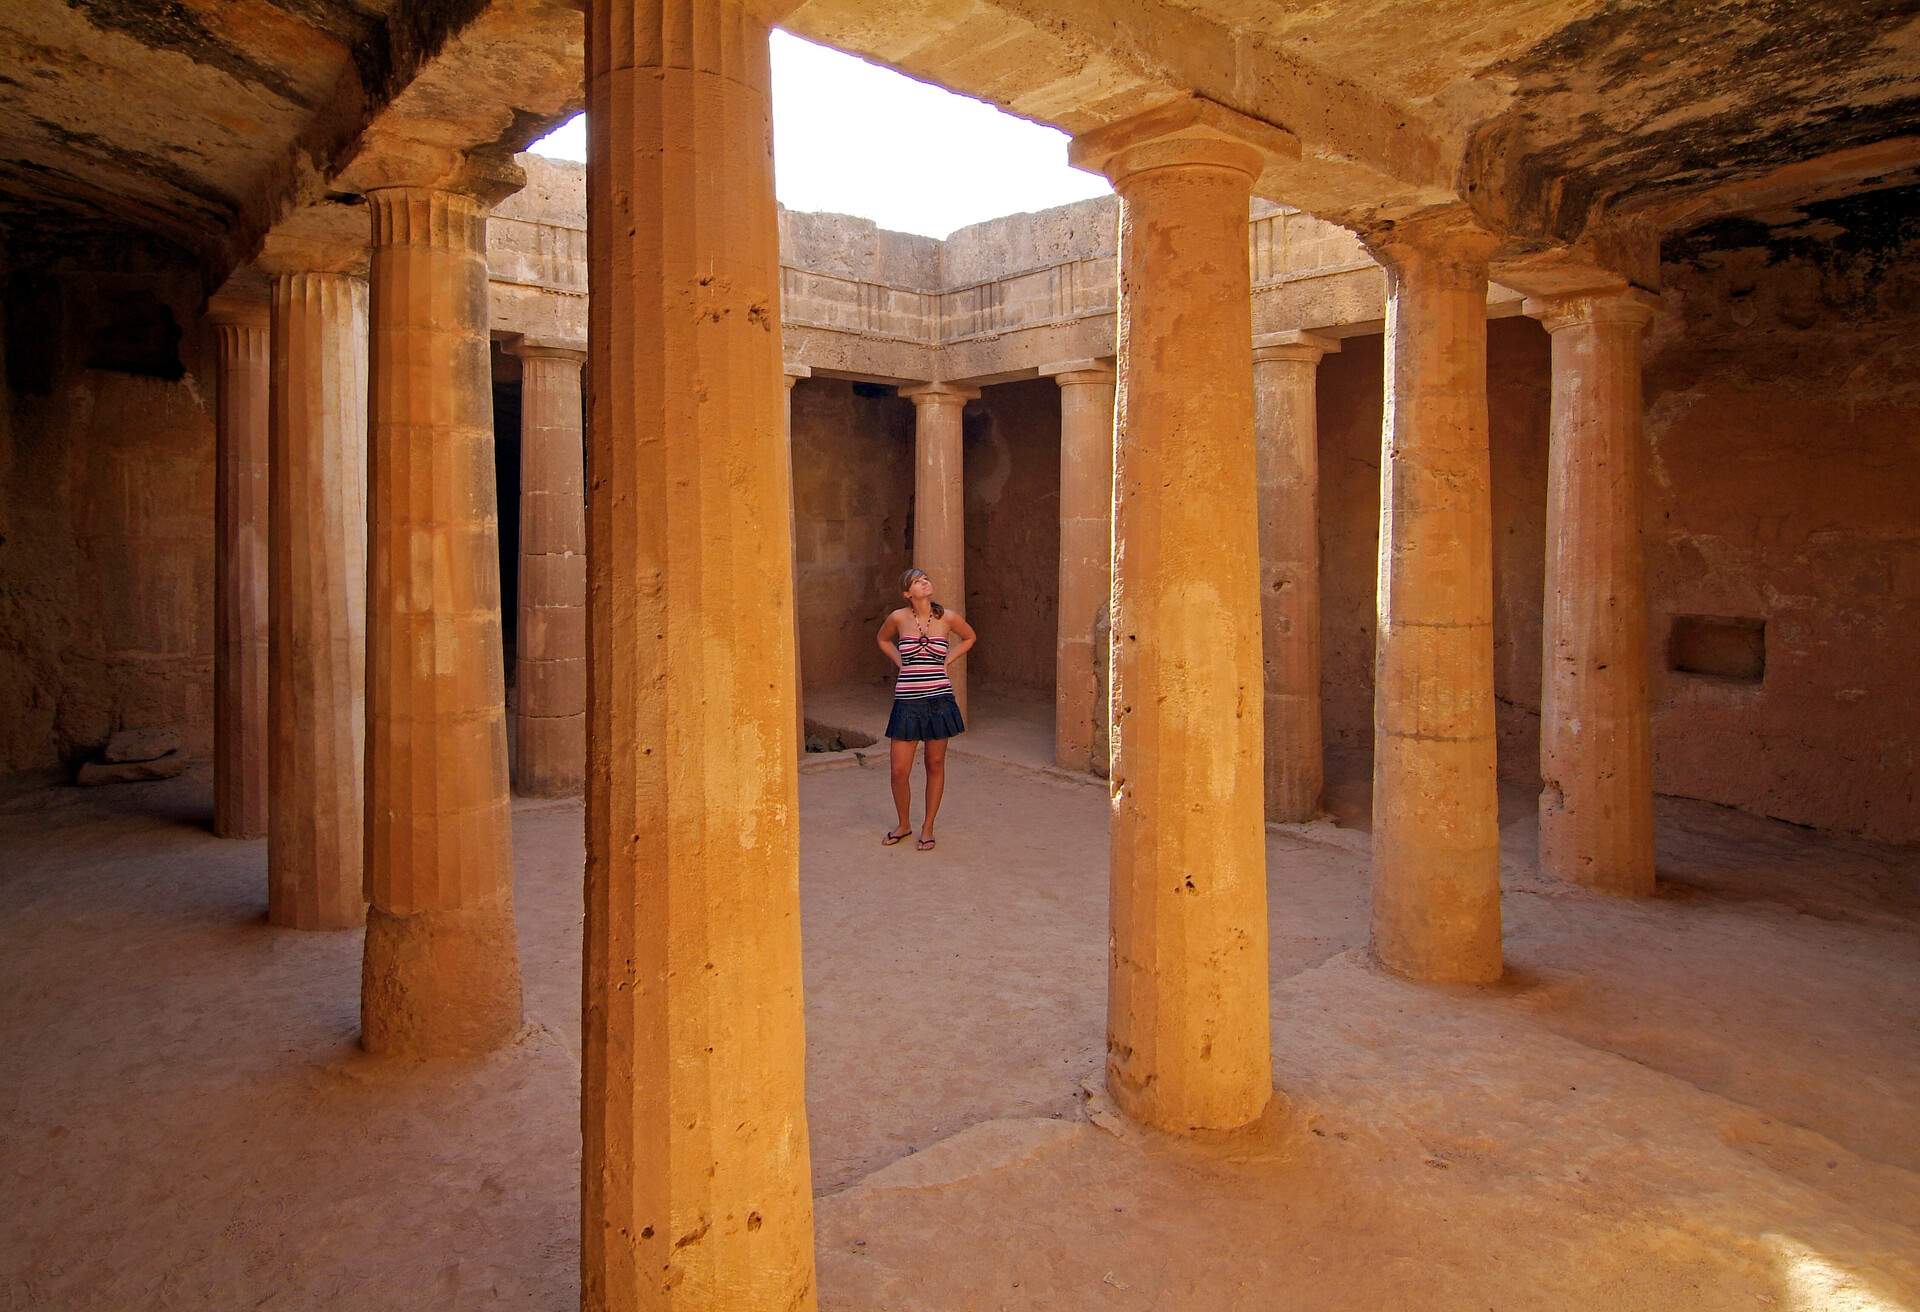 DEST_CYPRUS_PAPHOS_TOMBS-OF-THE-KINGS_GettyImages-481292969.jpg